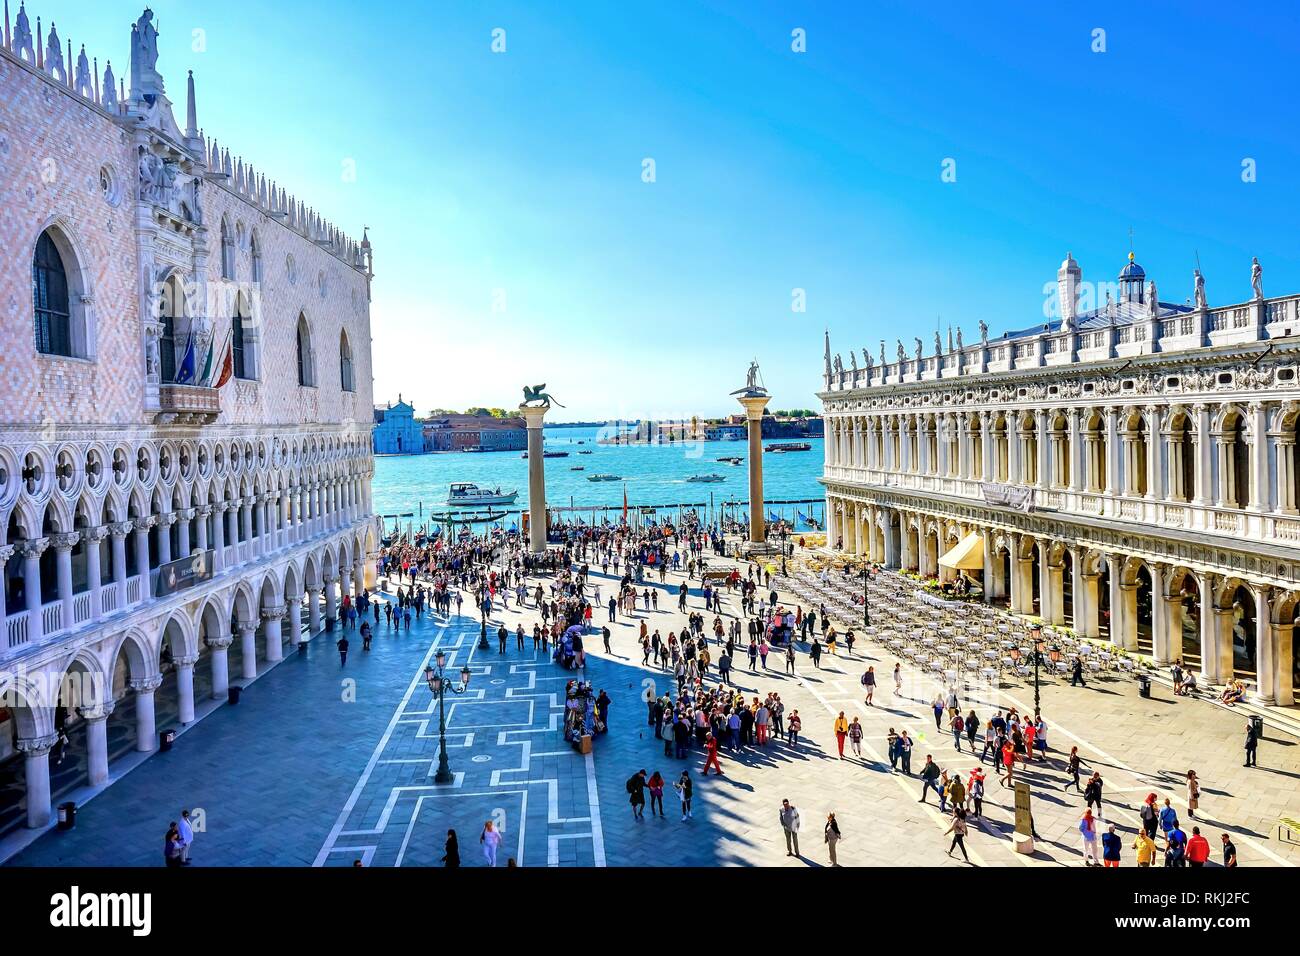 Doge's Palace Grand Canal Piazza San Marco Saint Mark's Square Venice Italy. Famous Entrance to Saint Mark's Square. Stock Photo